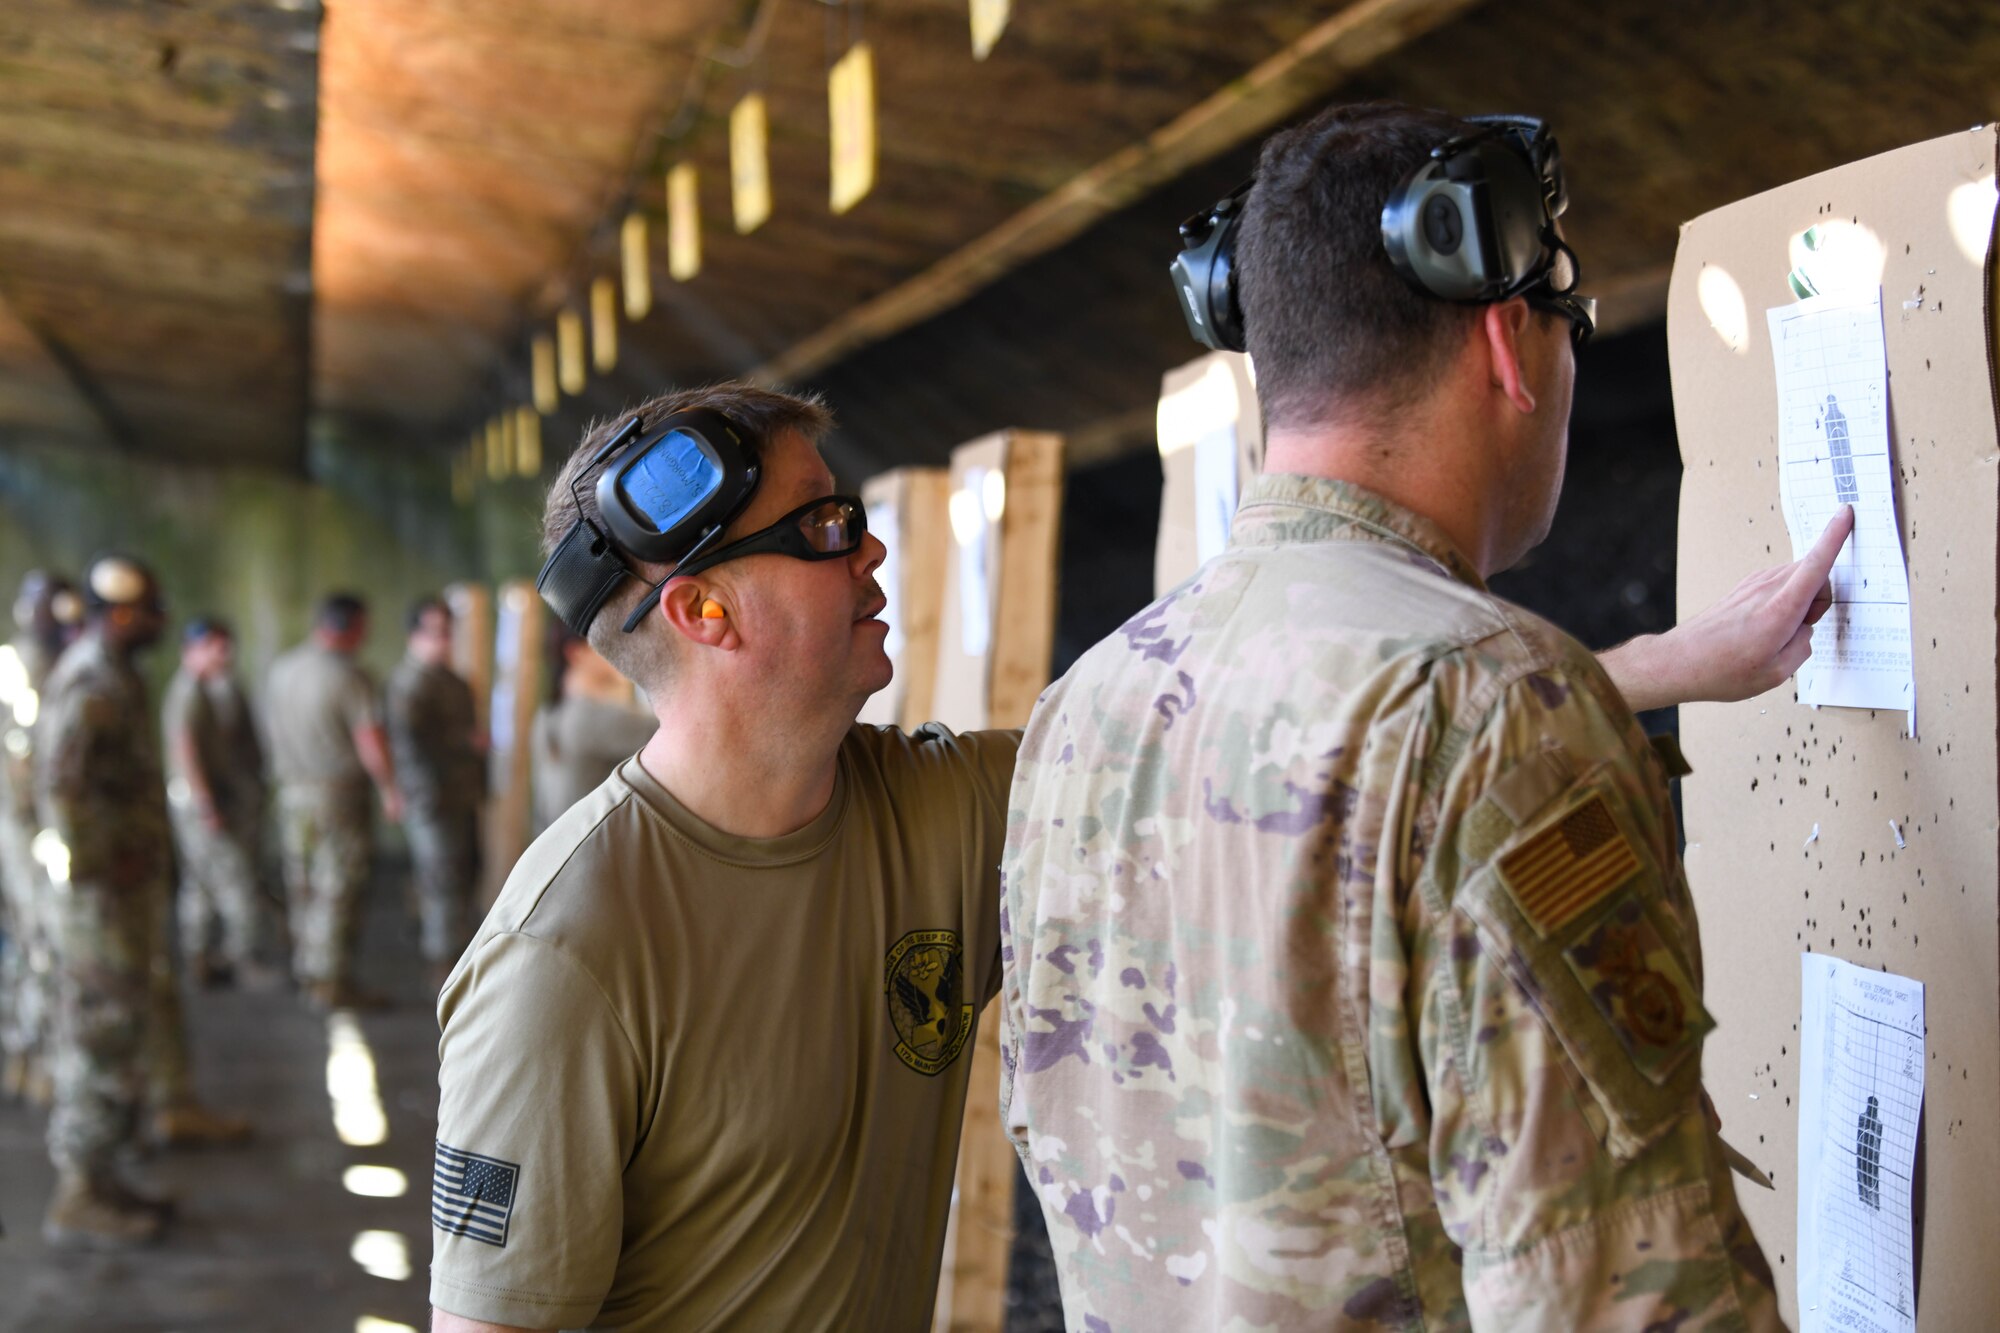 Members of the 172nd Airlift Wing, Jackson, Mississippi, Resource Protection Team qualified on the M18 pistol and M4 rifle at the Combat Readiness Training Center, Gulfport, Mississippi, December 6, 2022. The 172 RPT is a volunteer force, drawn from shops across the base, comprised of trained multi-capable augmentees to the 172nd Security Forces Squadron. U.S. Air National Guard photo by Airman 1st Class Shardae McAfee.